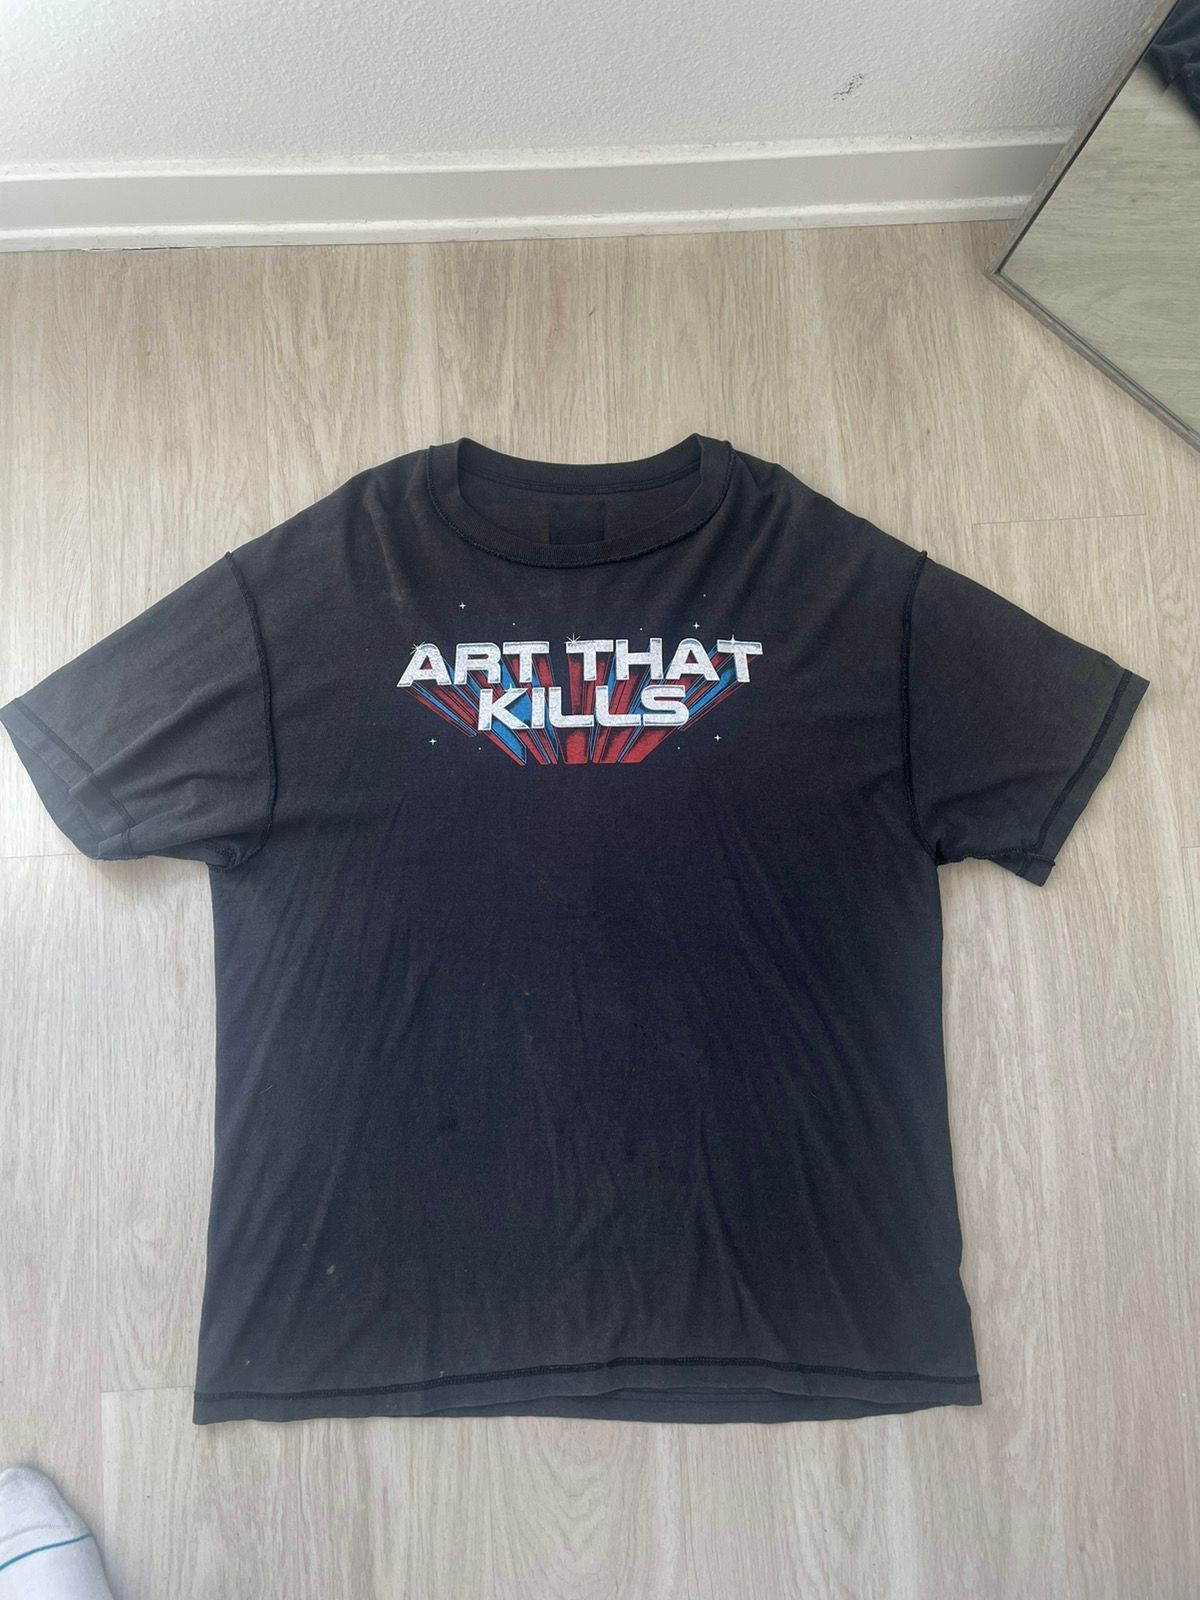 Pre-owned Gallery Dept. Art That Kills Glitter Tee Size Large In Black